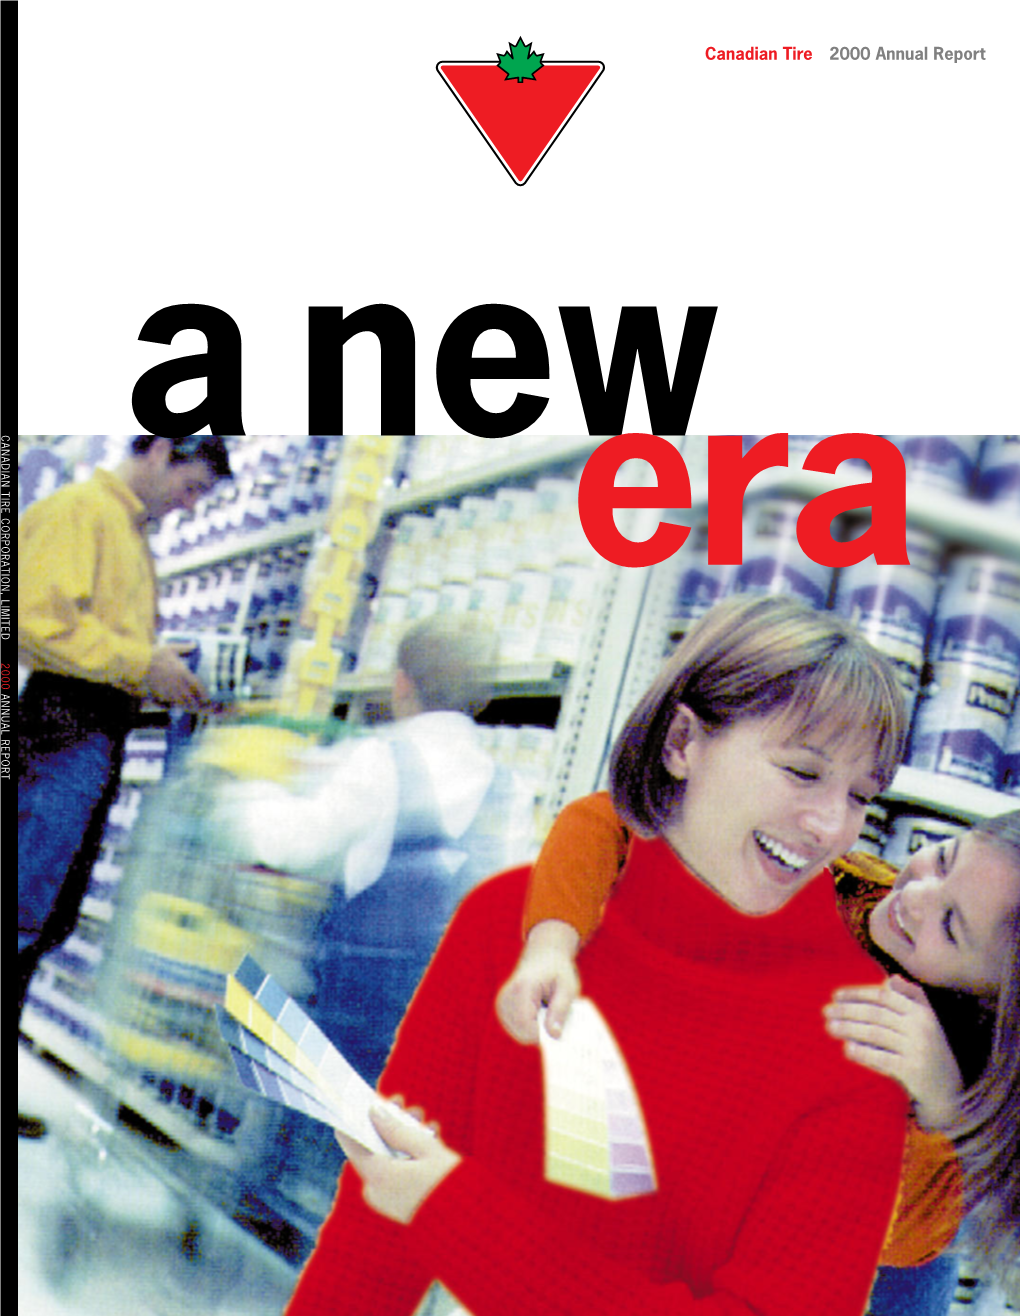 Canadian Tire 2000 Annual Report